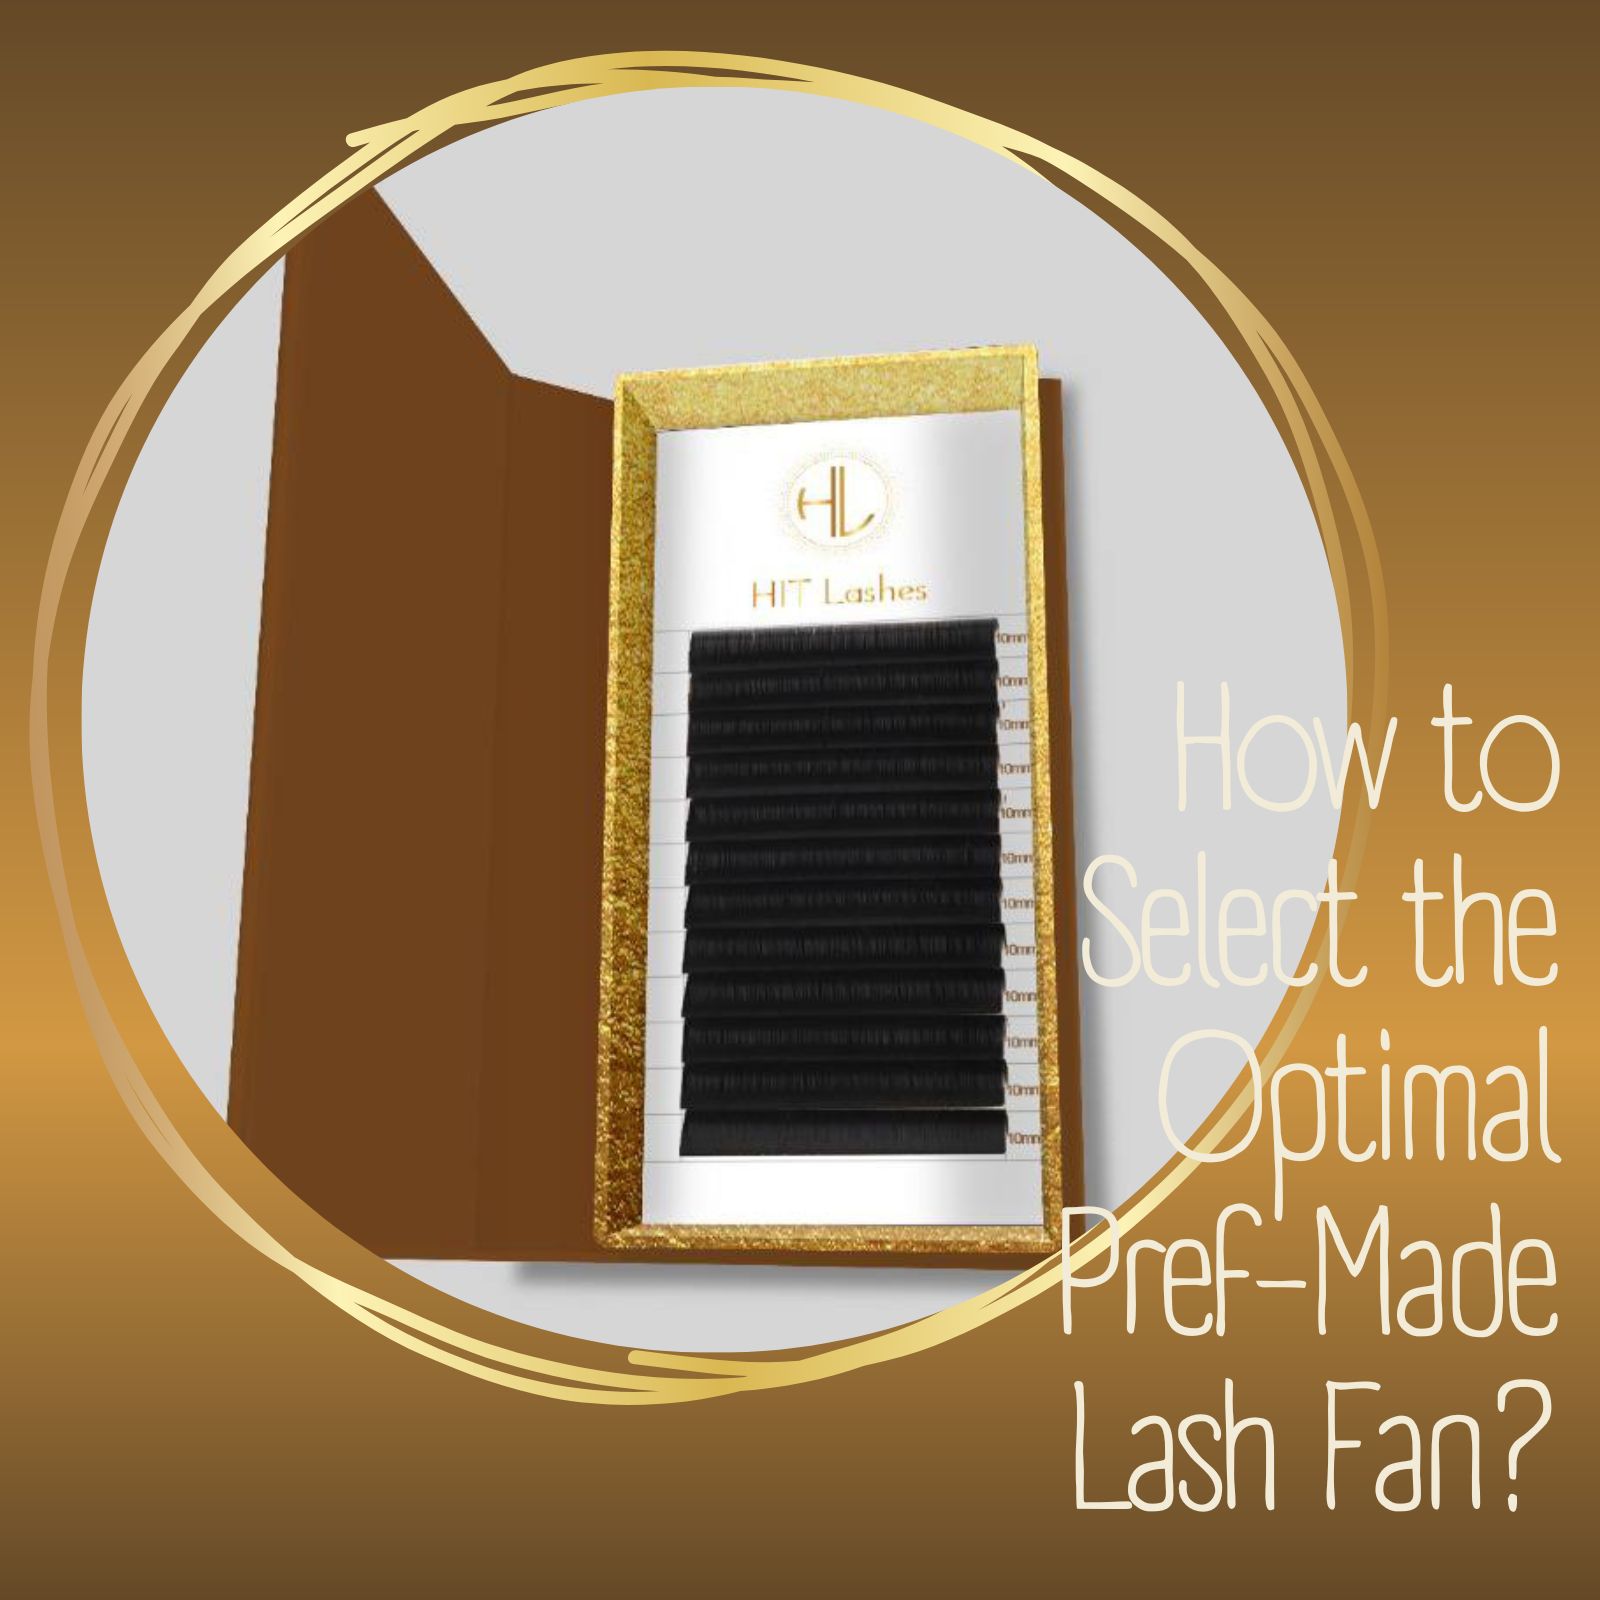 How to Select the Optimal Pref-Made Lash Fan